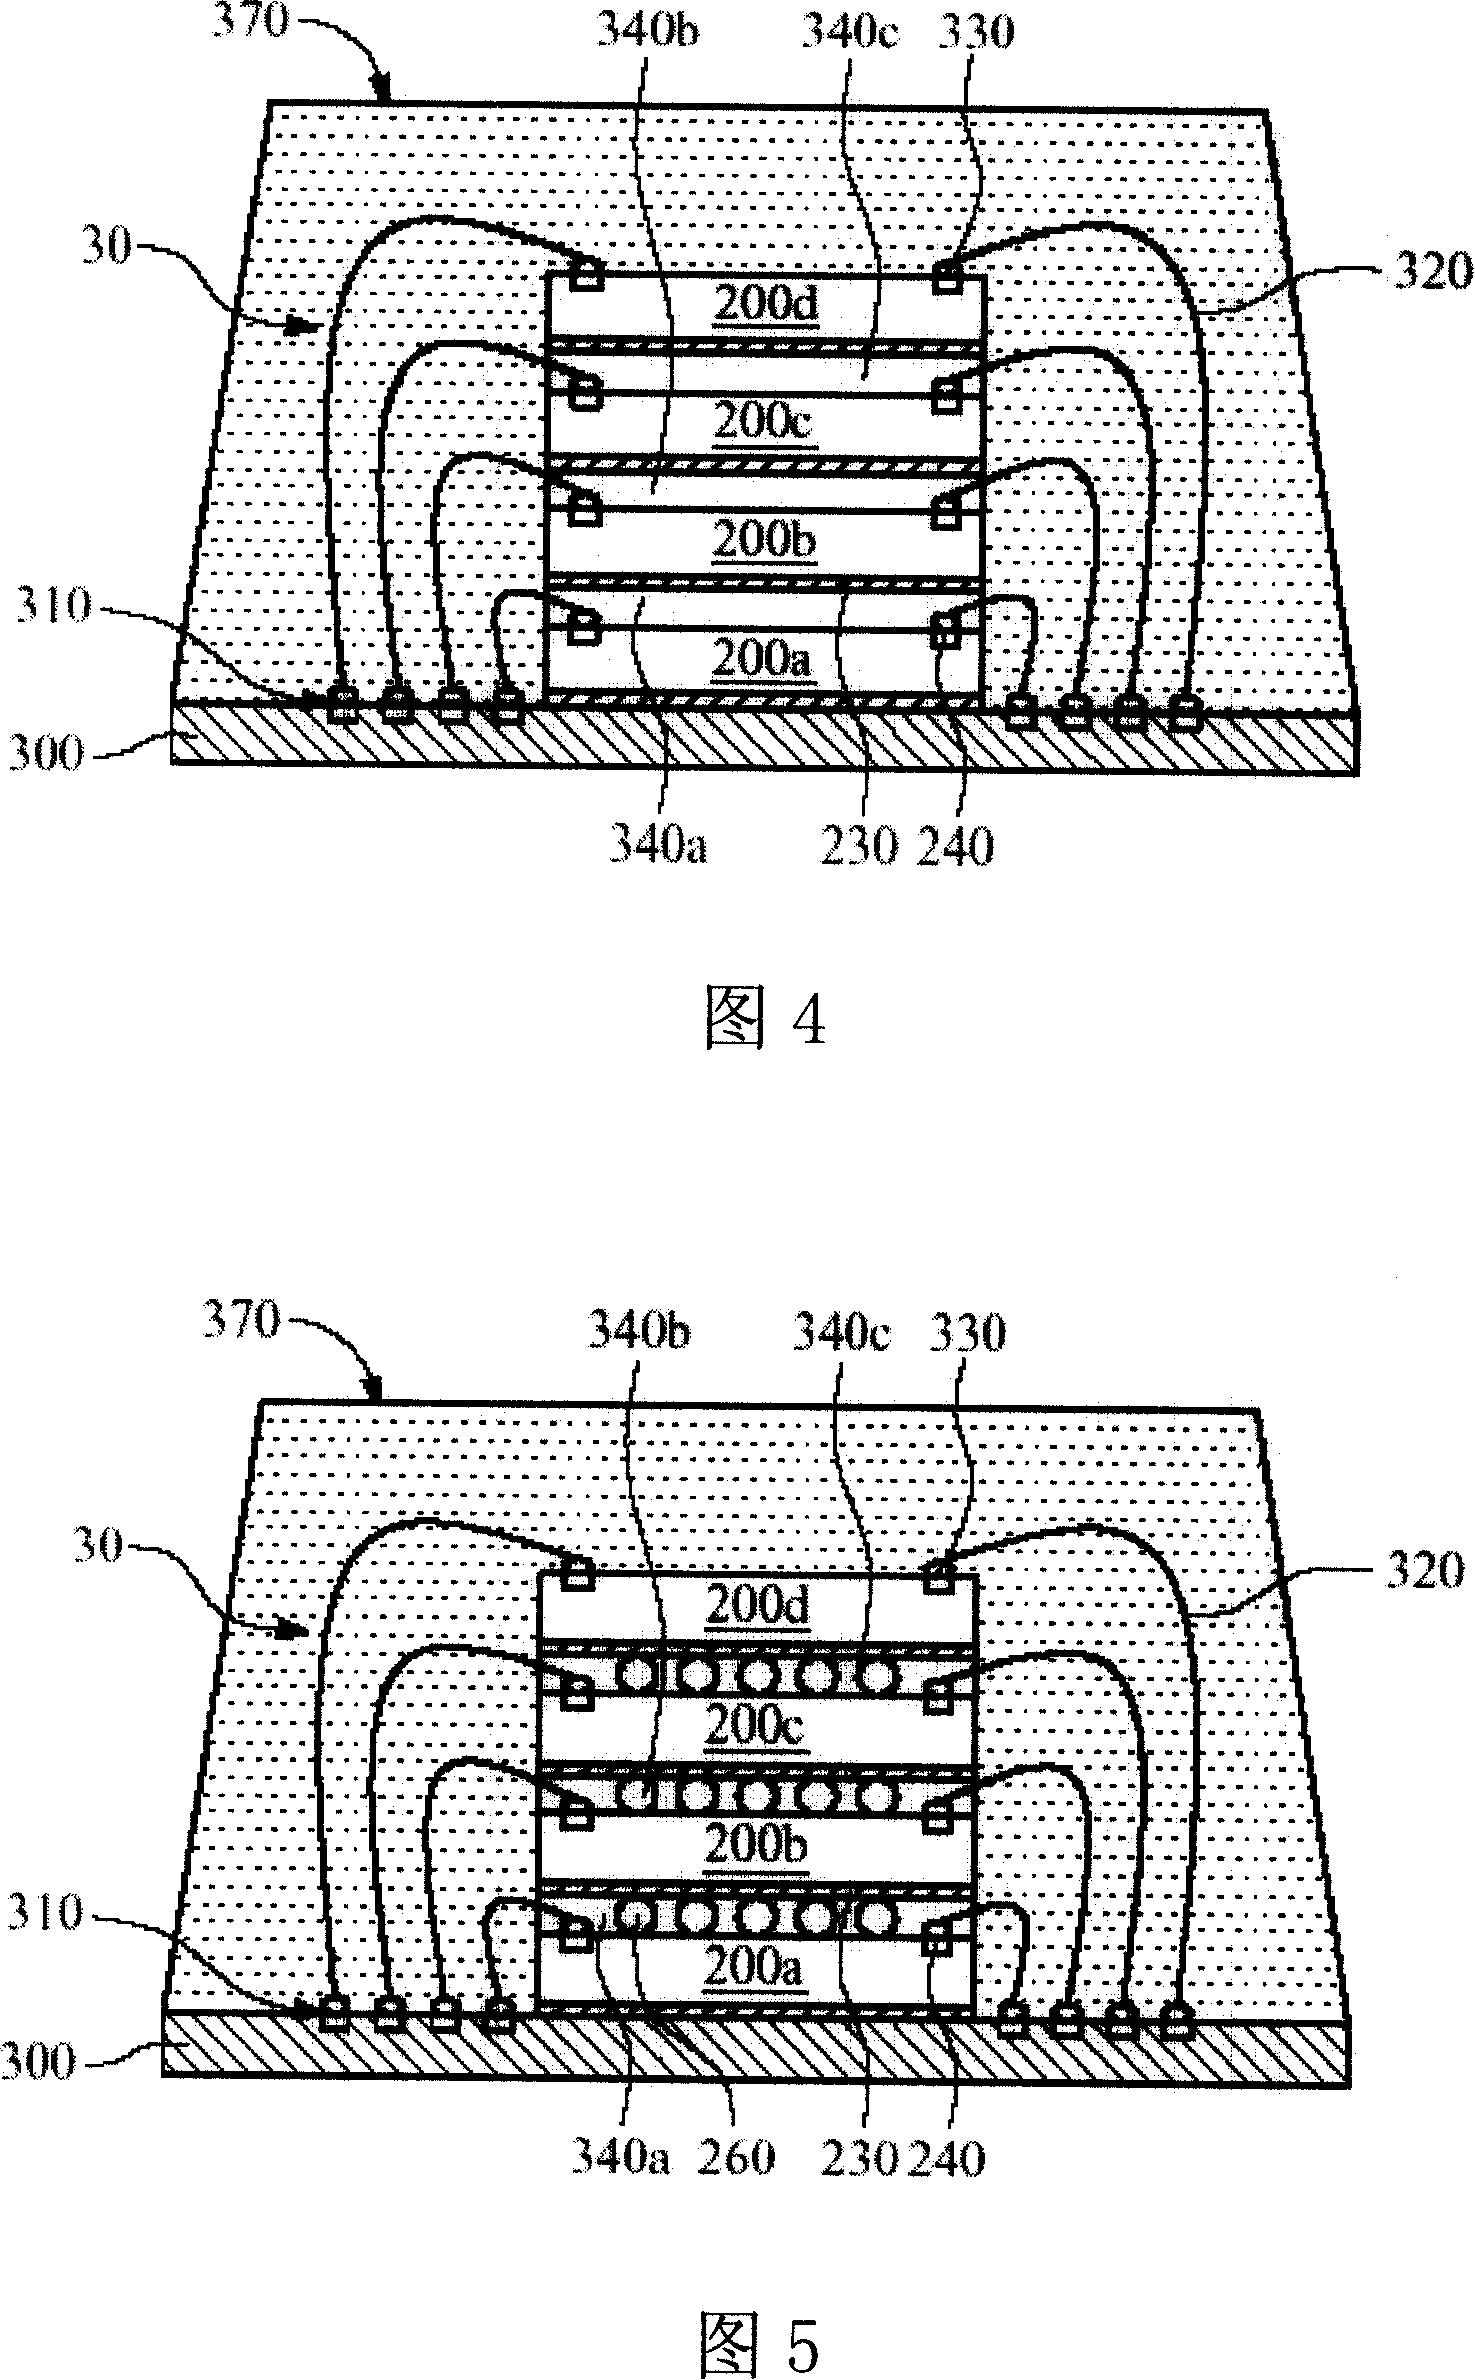 Multi-chip stacking type packaging structure